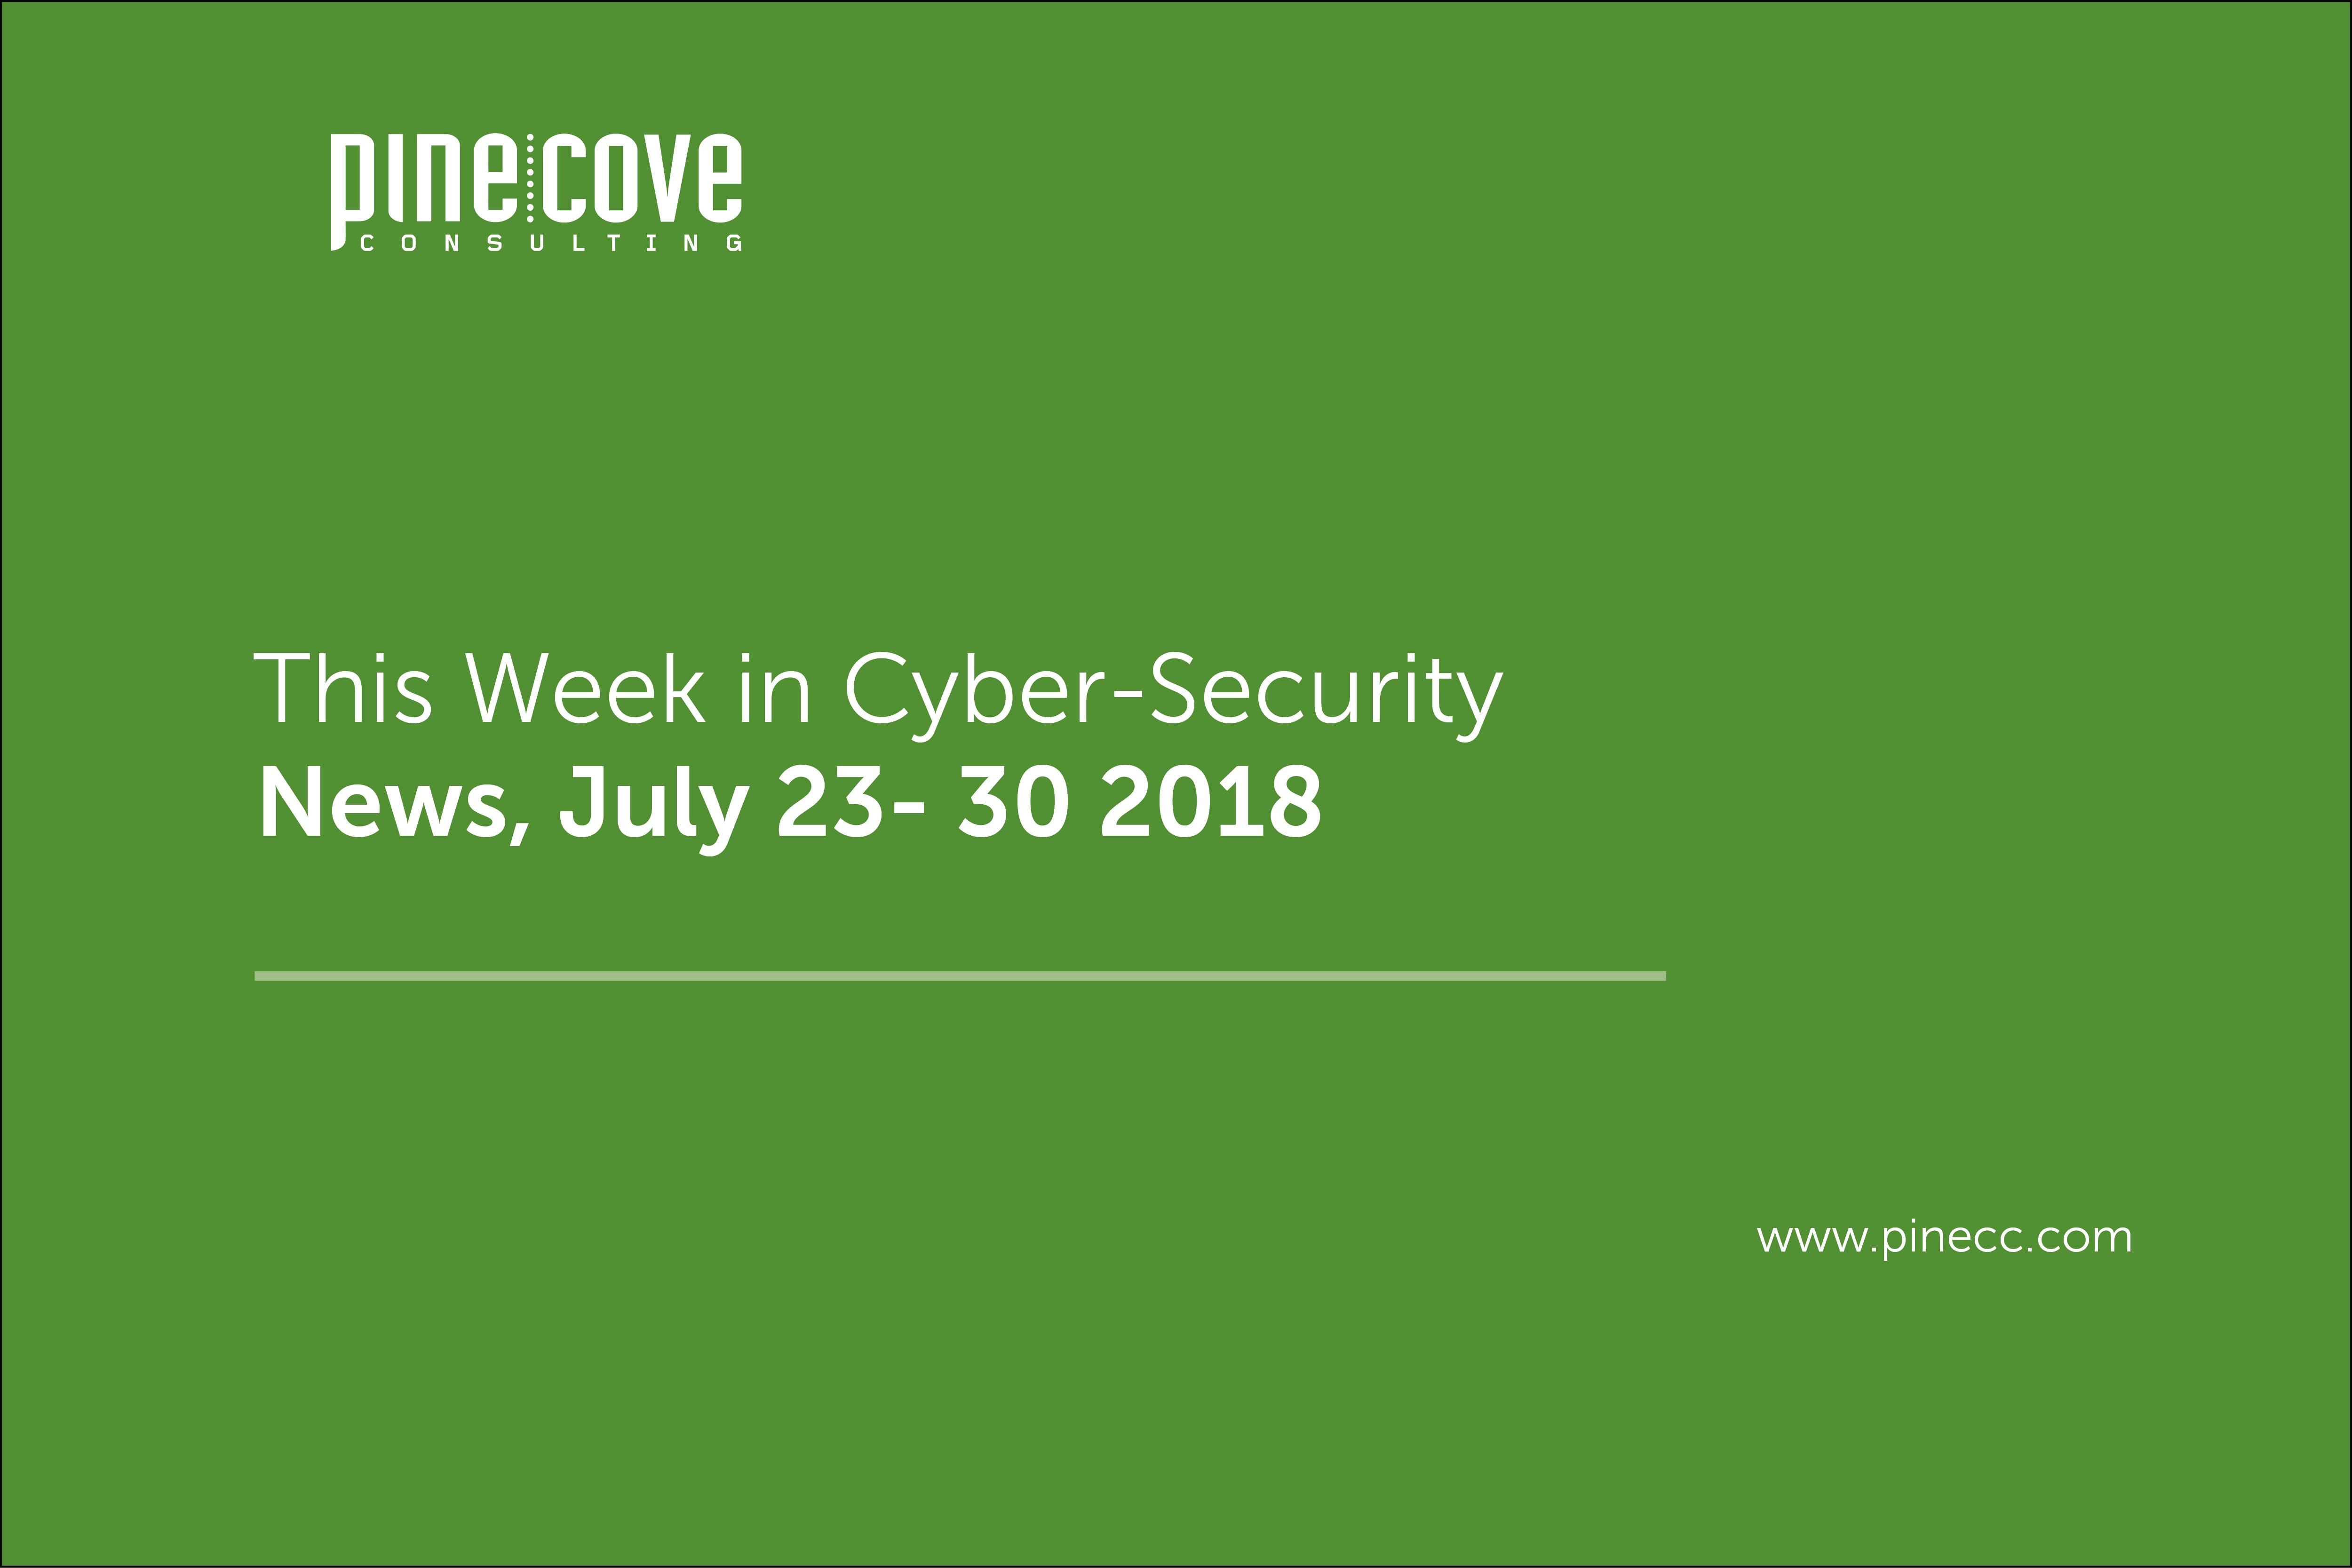 Cyber-Security News